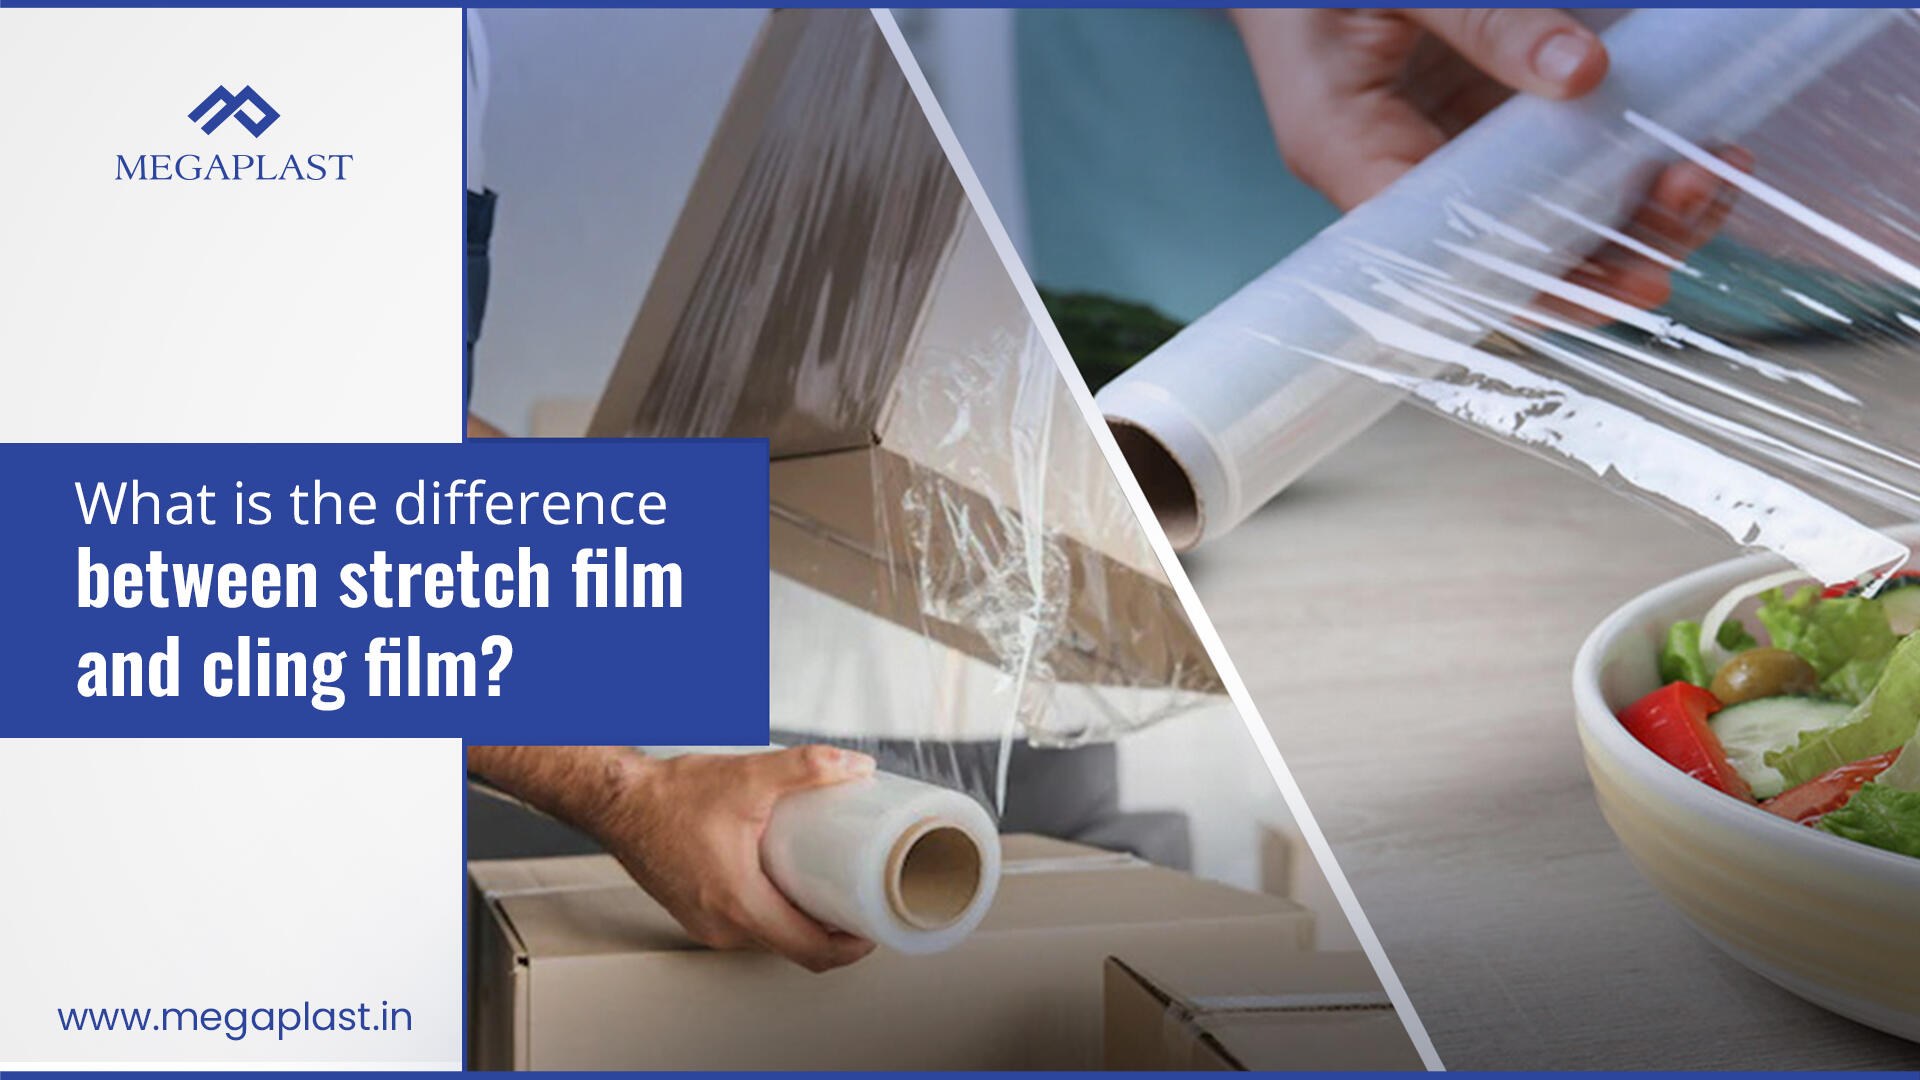 What is the difference between stretch film and cling film?